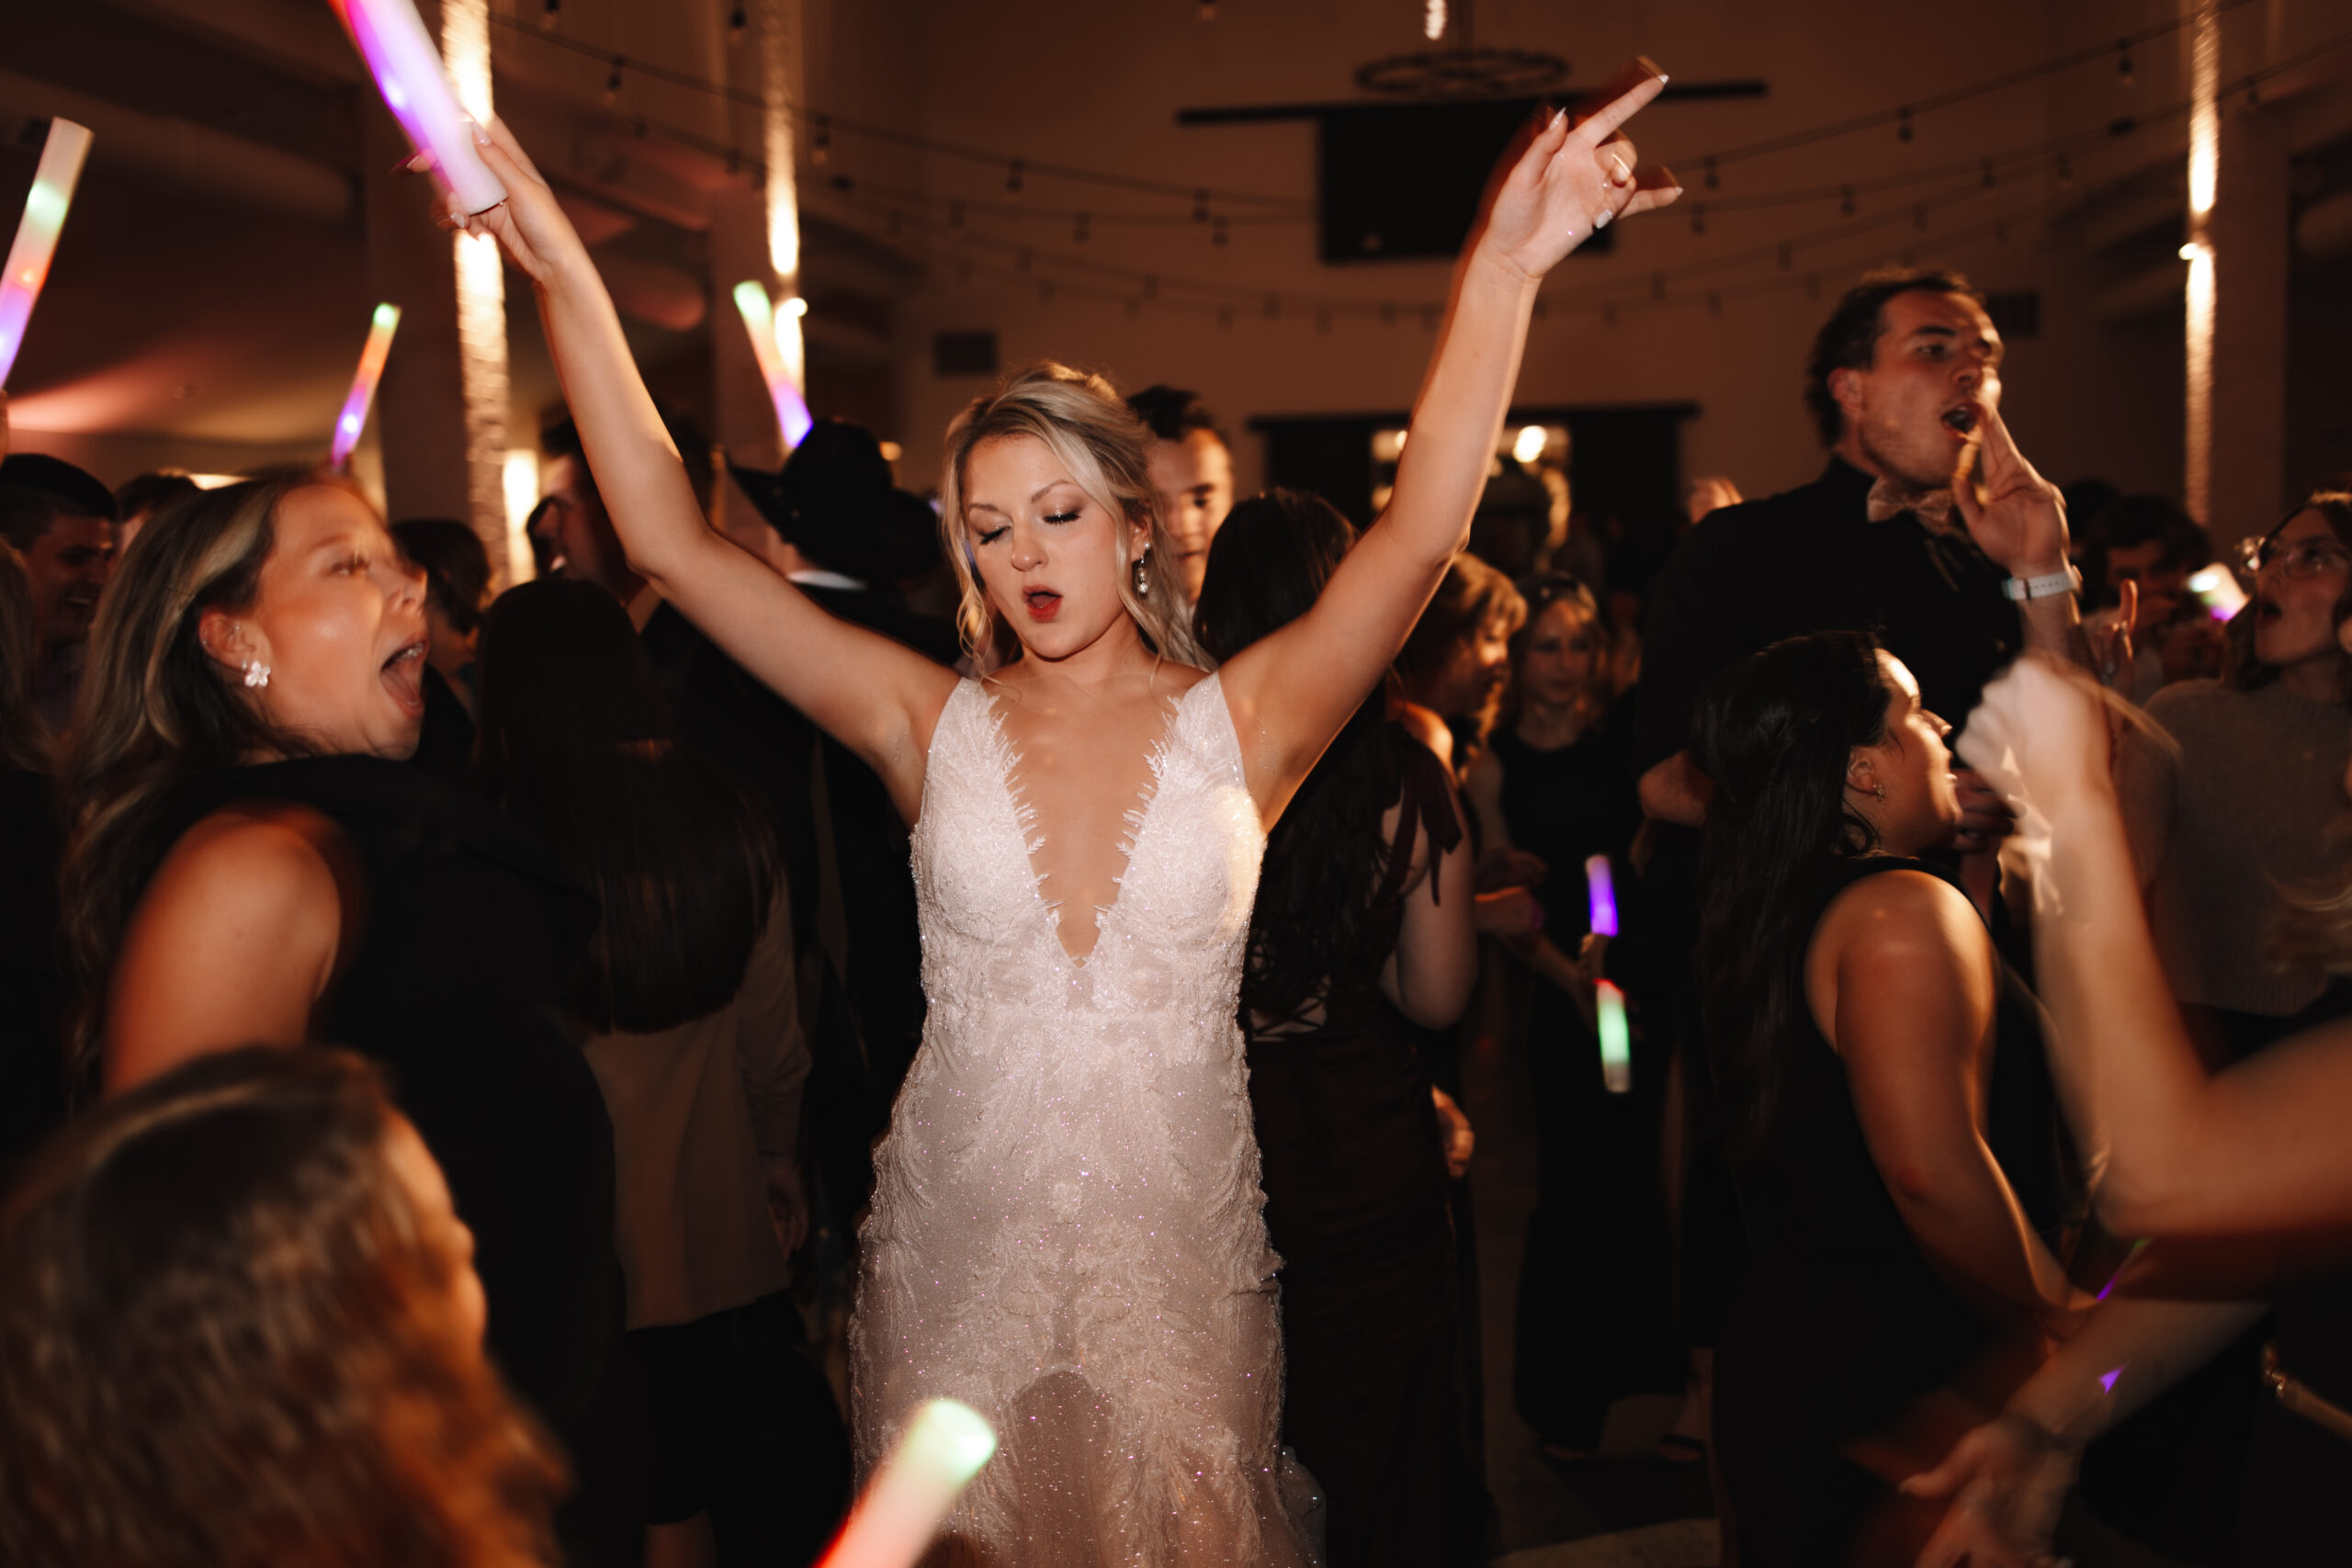 Bride dancing and lifting her hands in the air on the dance floor with glow and the dark sticks around them